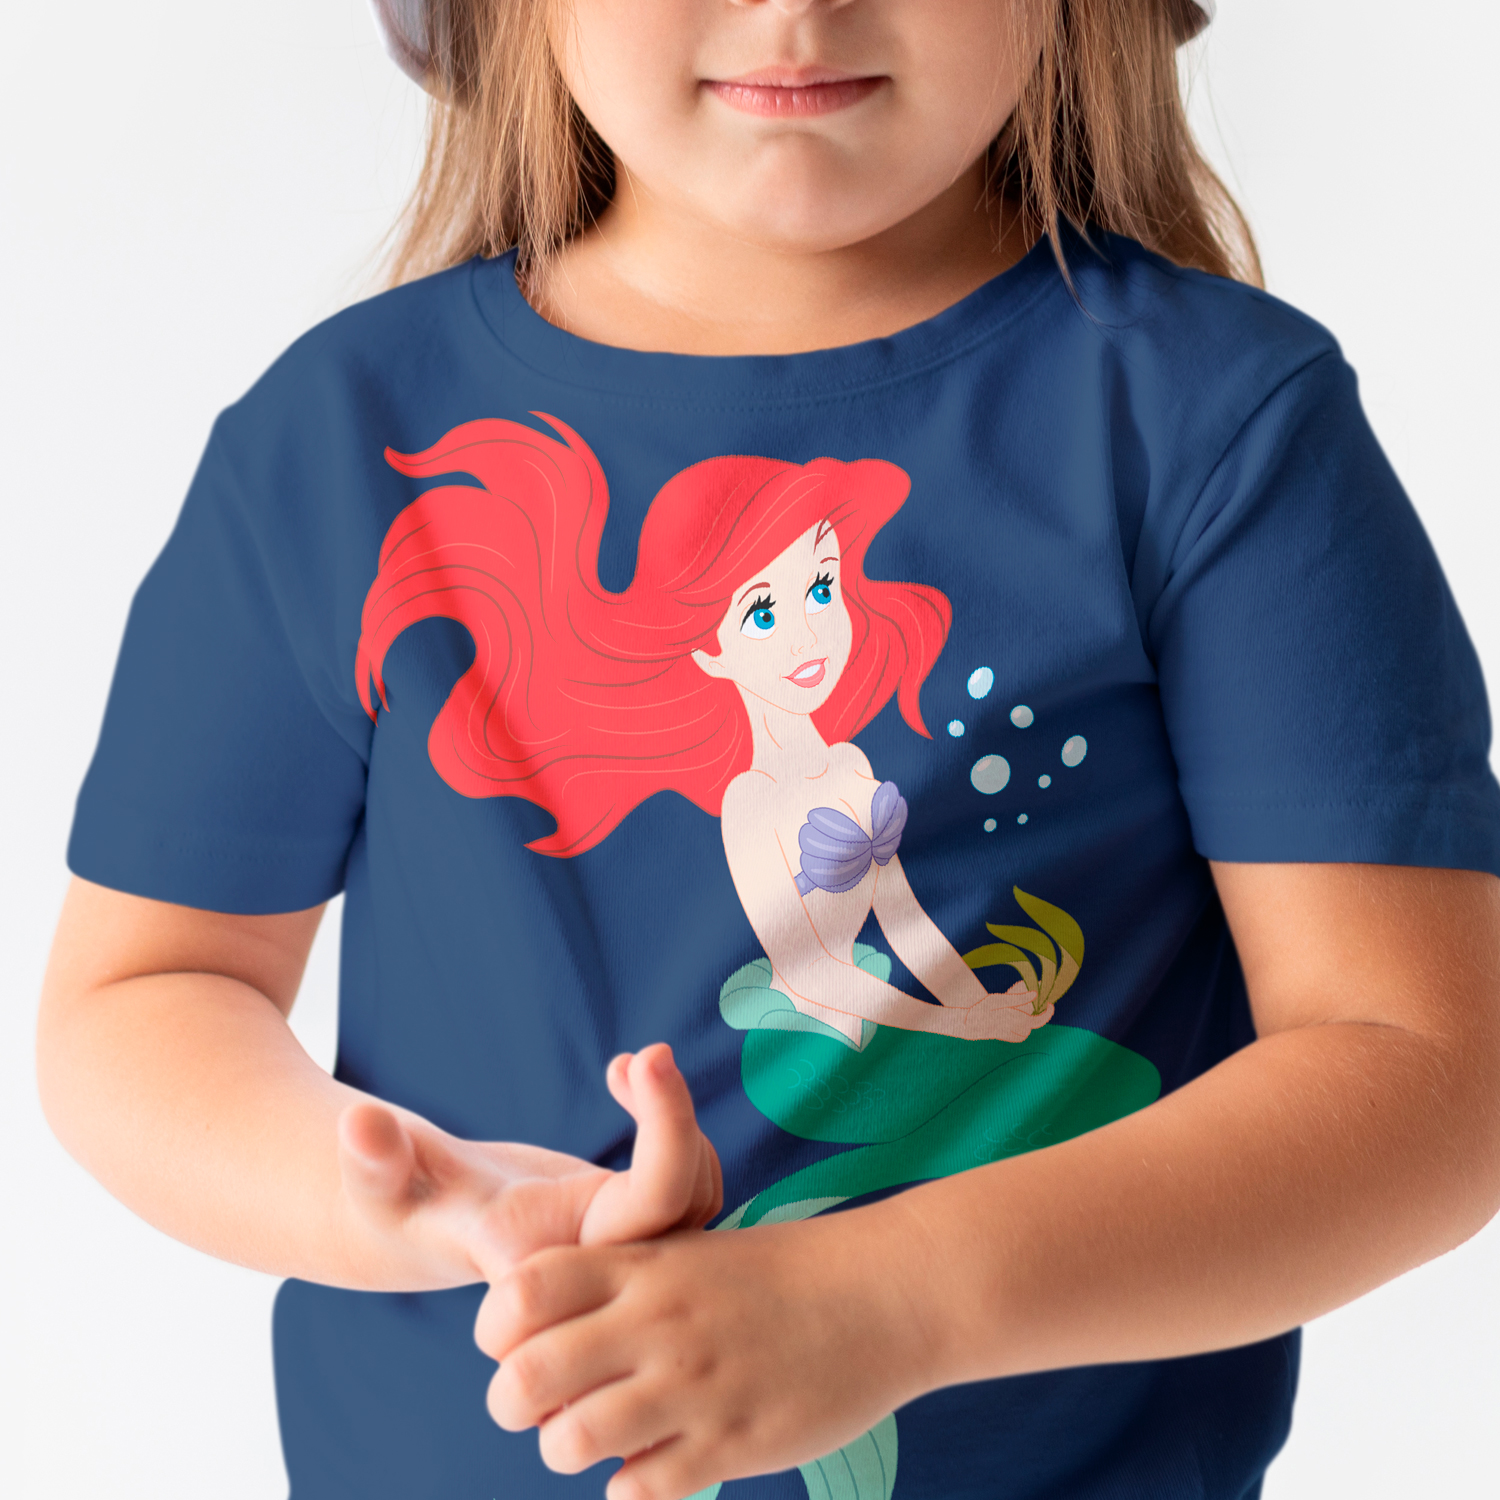 Print on a children's t-shirt with a mermaid.